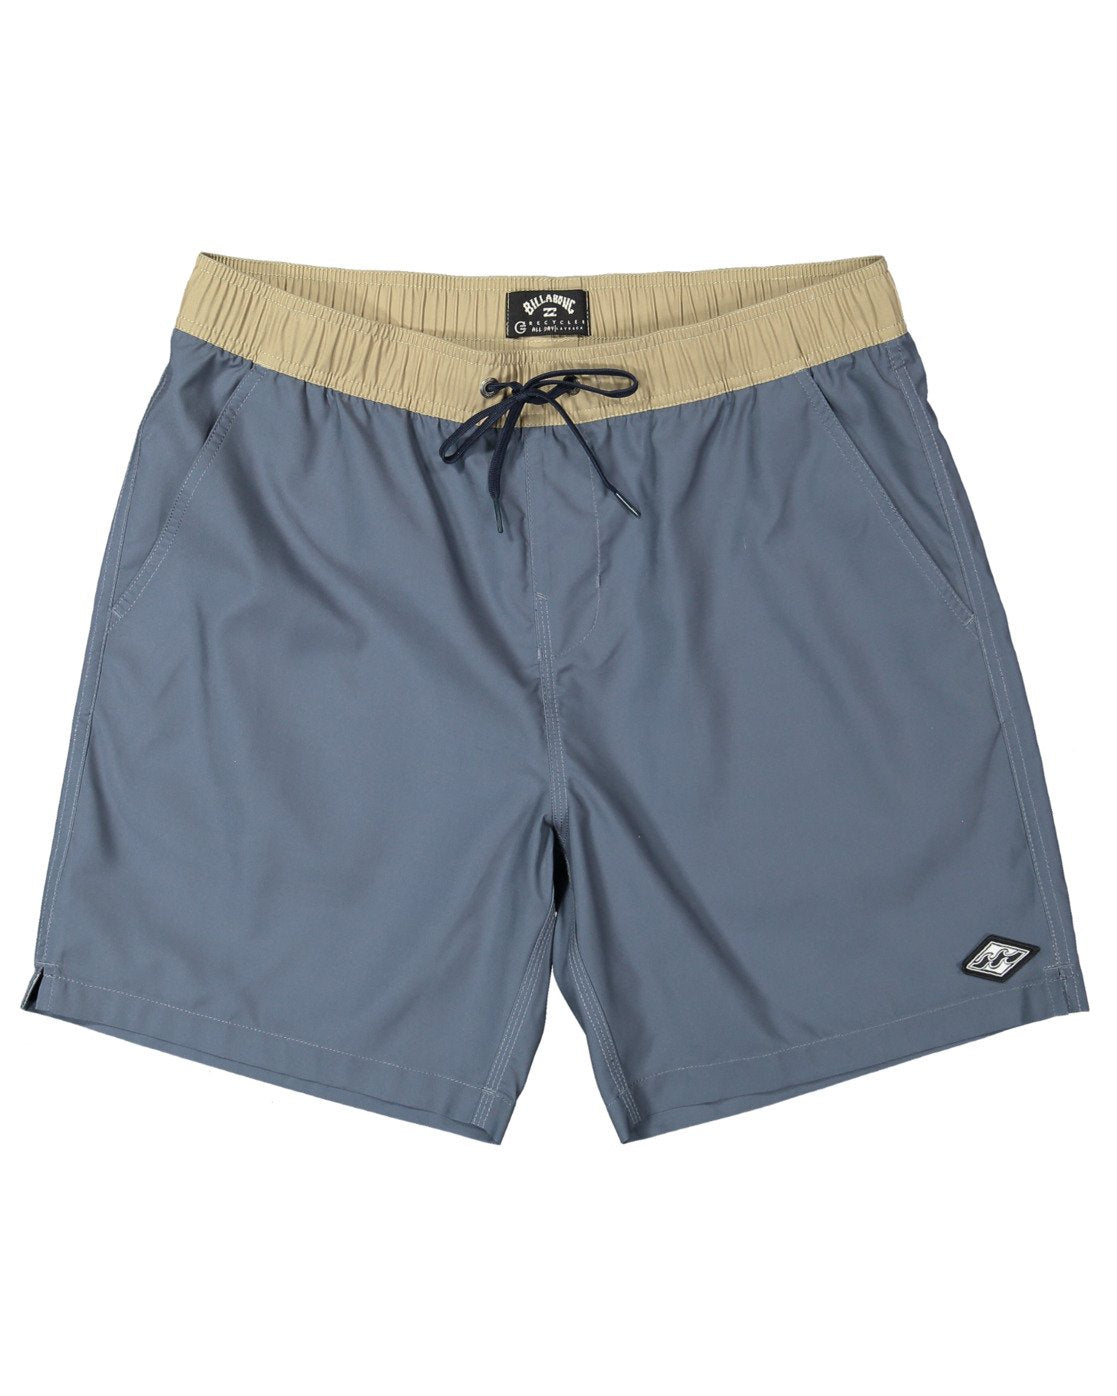 All Day Pigment Layback Boardshorts